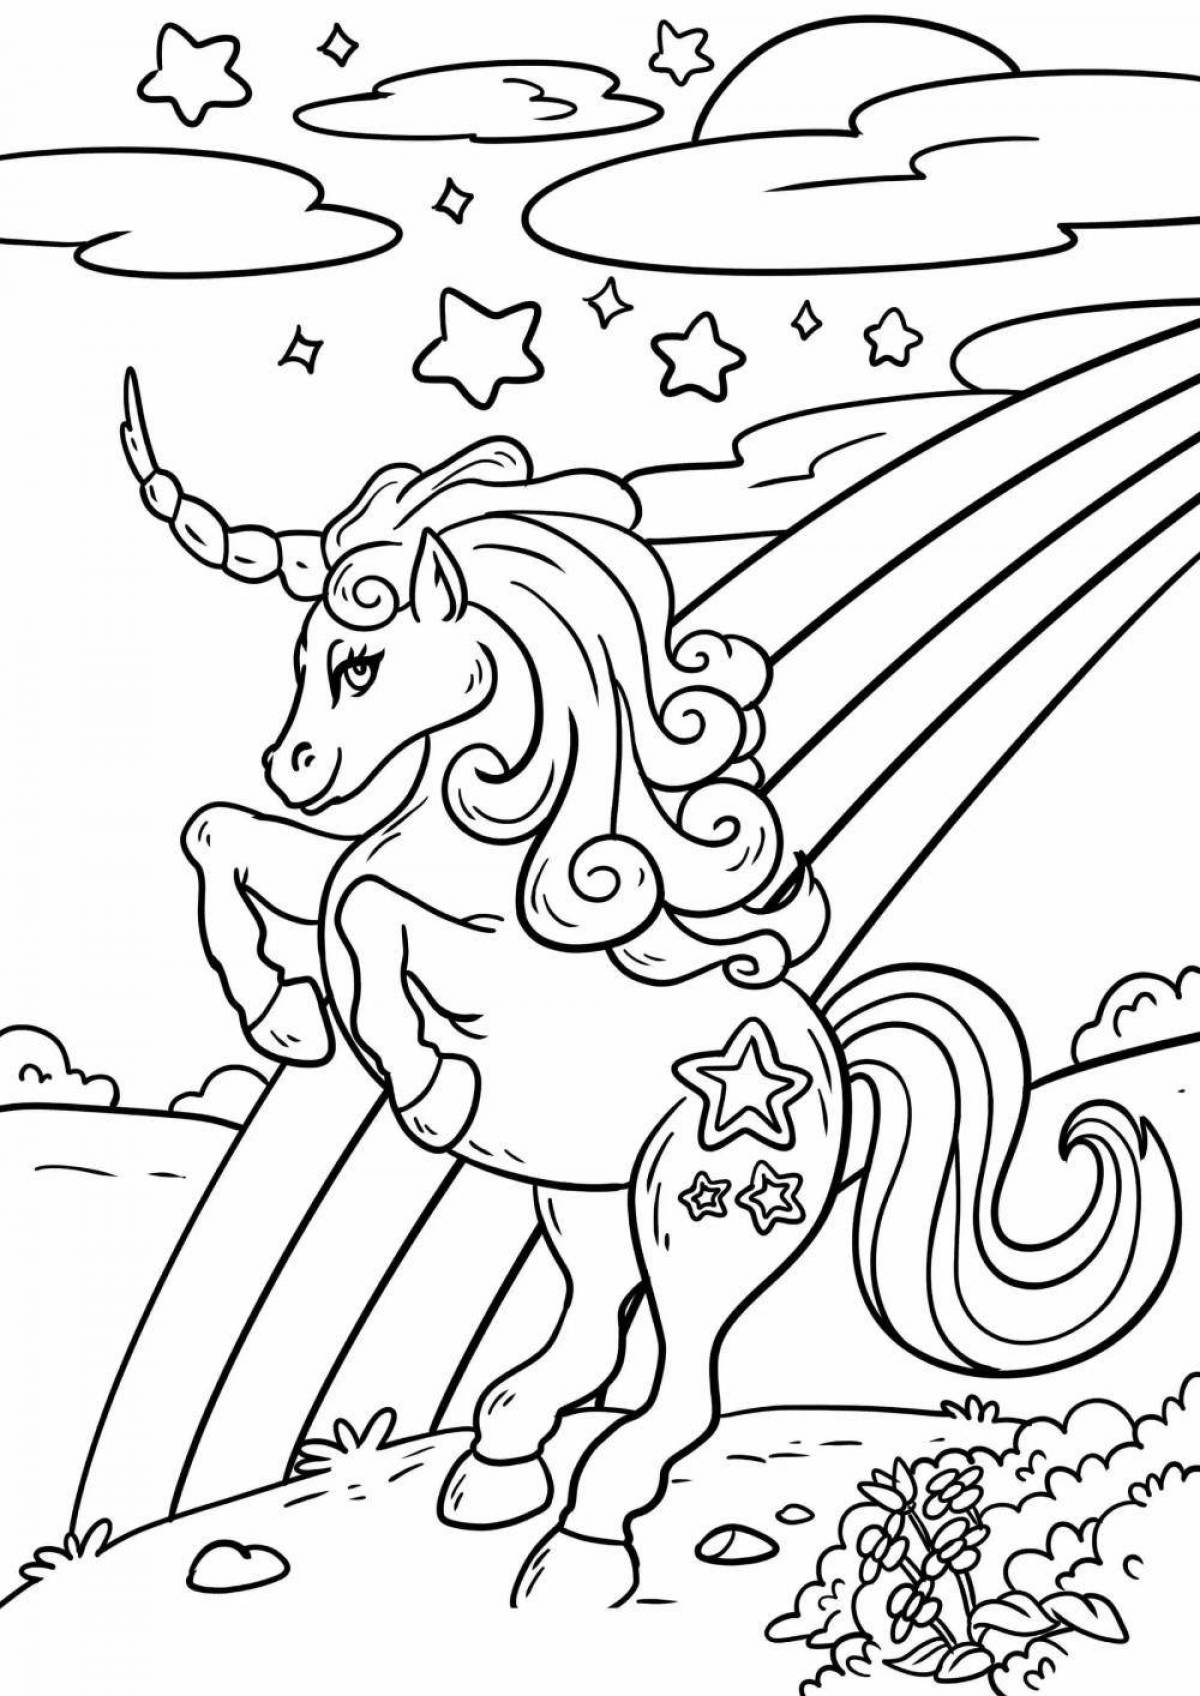 Radiant coloring page unicorn picture for kids